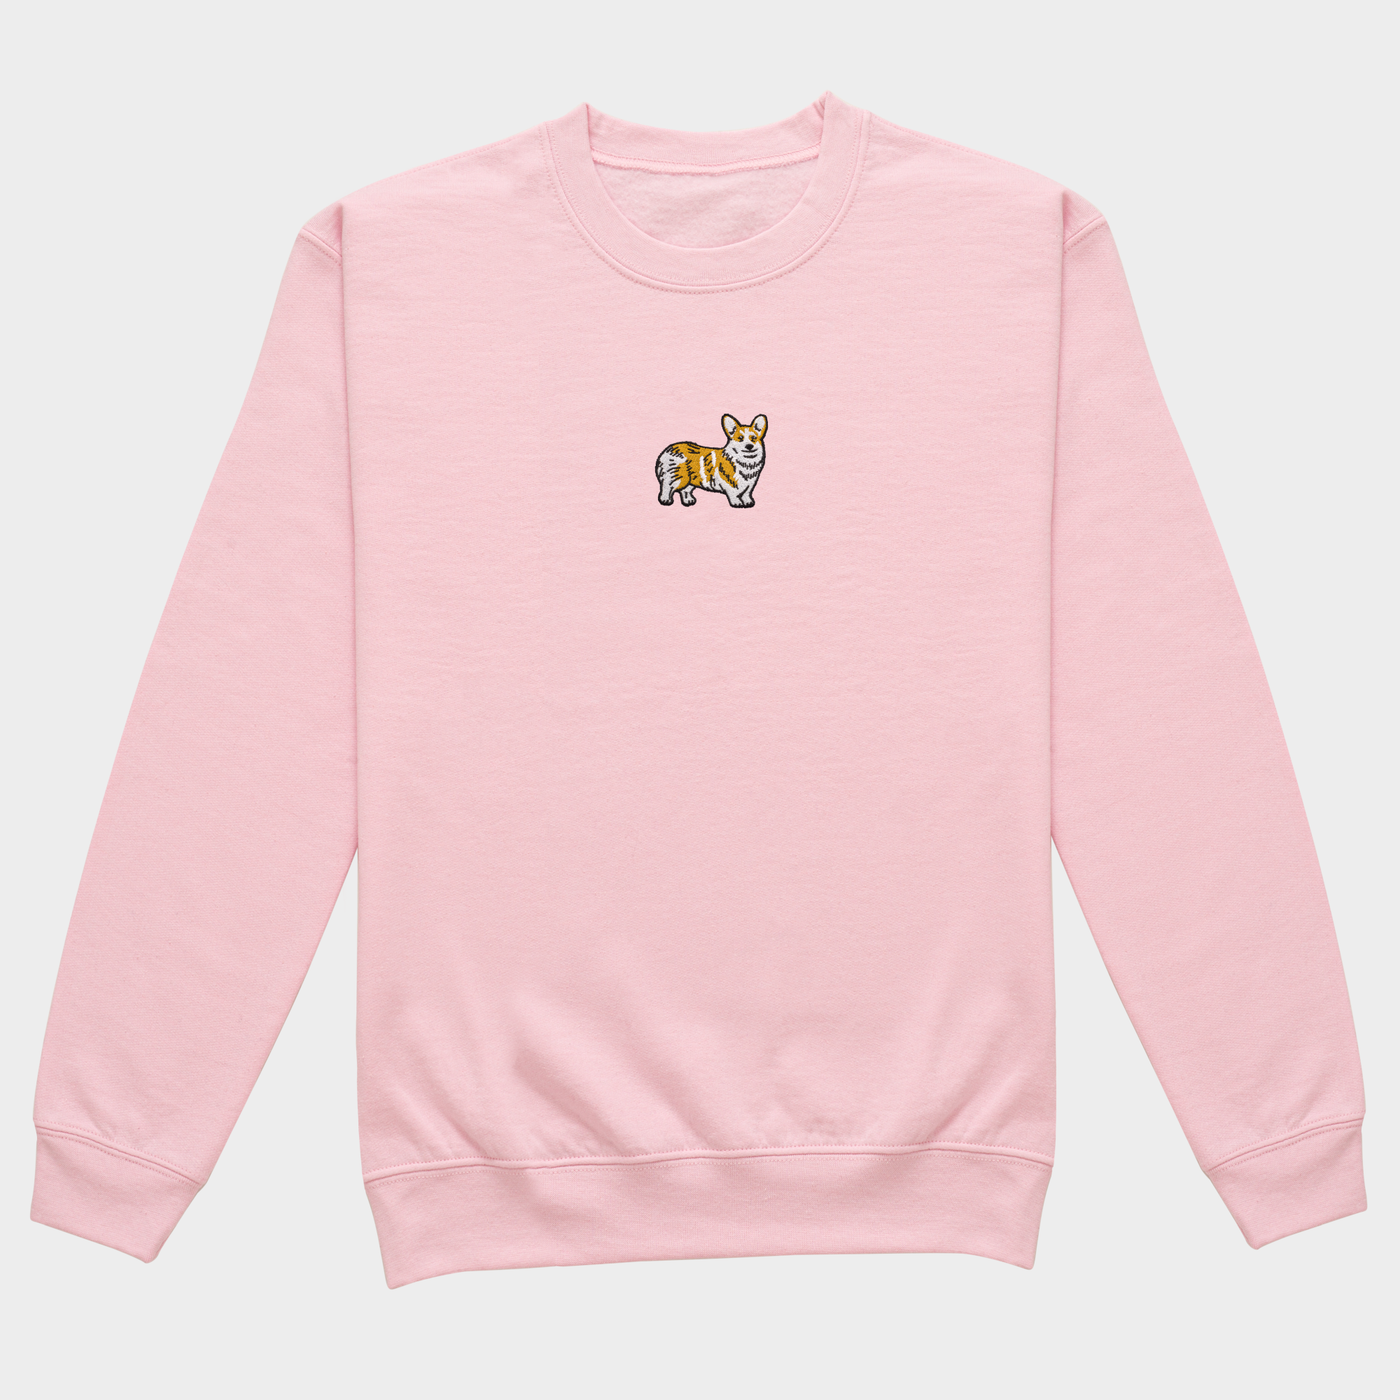 Bobby's Planet Women's Embroidered Corgi Sweatshirt from Paws Dog Cat Animals Collection in Light Pink Color#color_light-pink